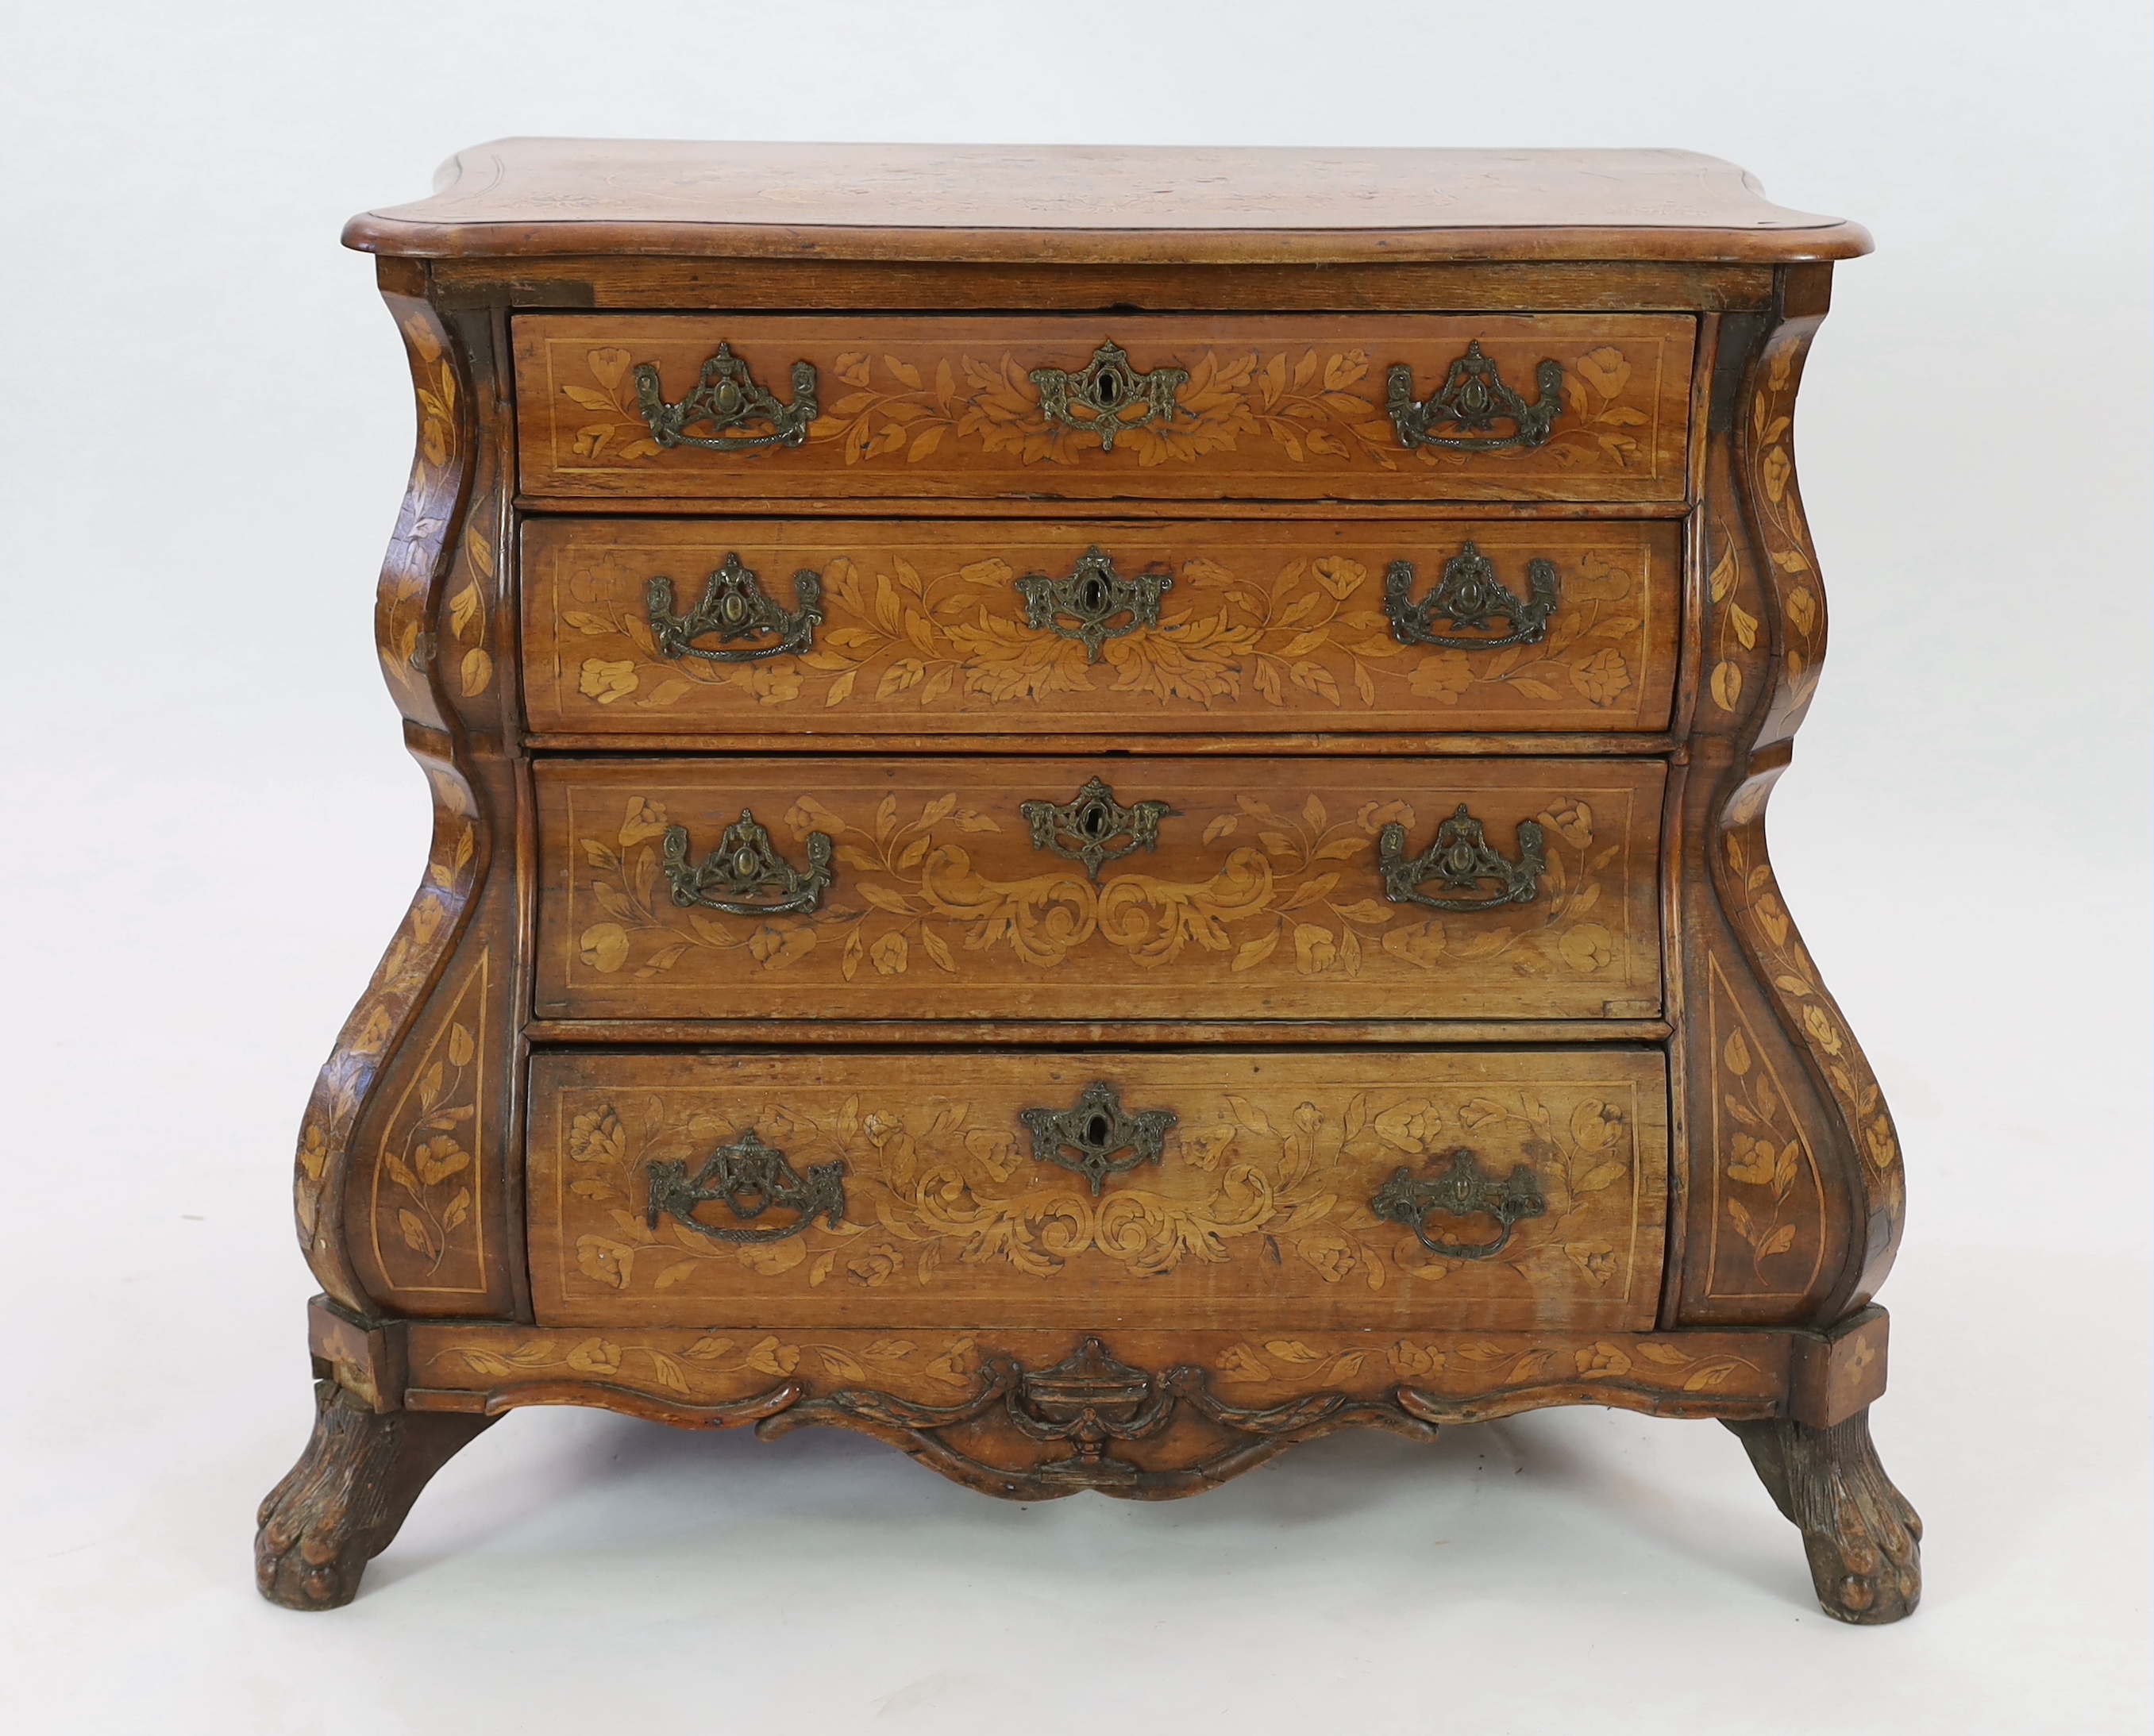 An early 19th century Dutch walnut and marquetry bombé front commode, width 110cm, depth 60cm, height 87cm